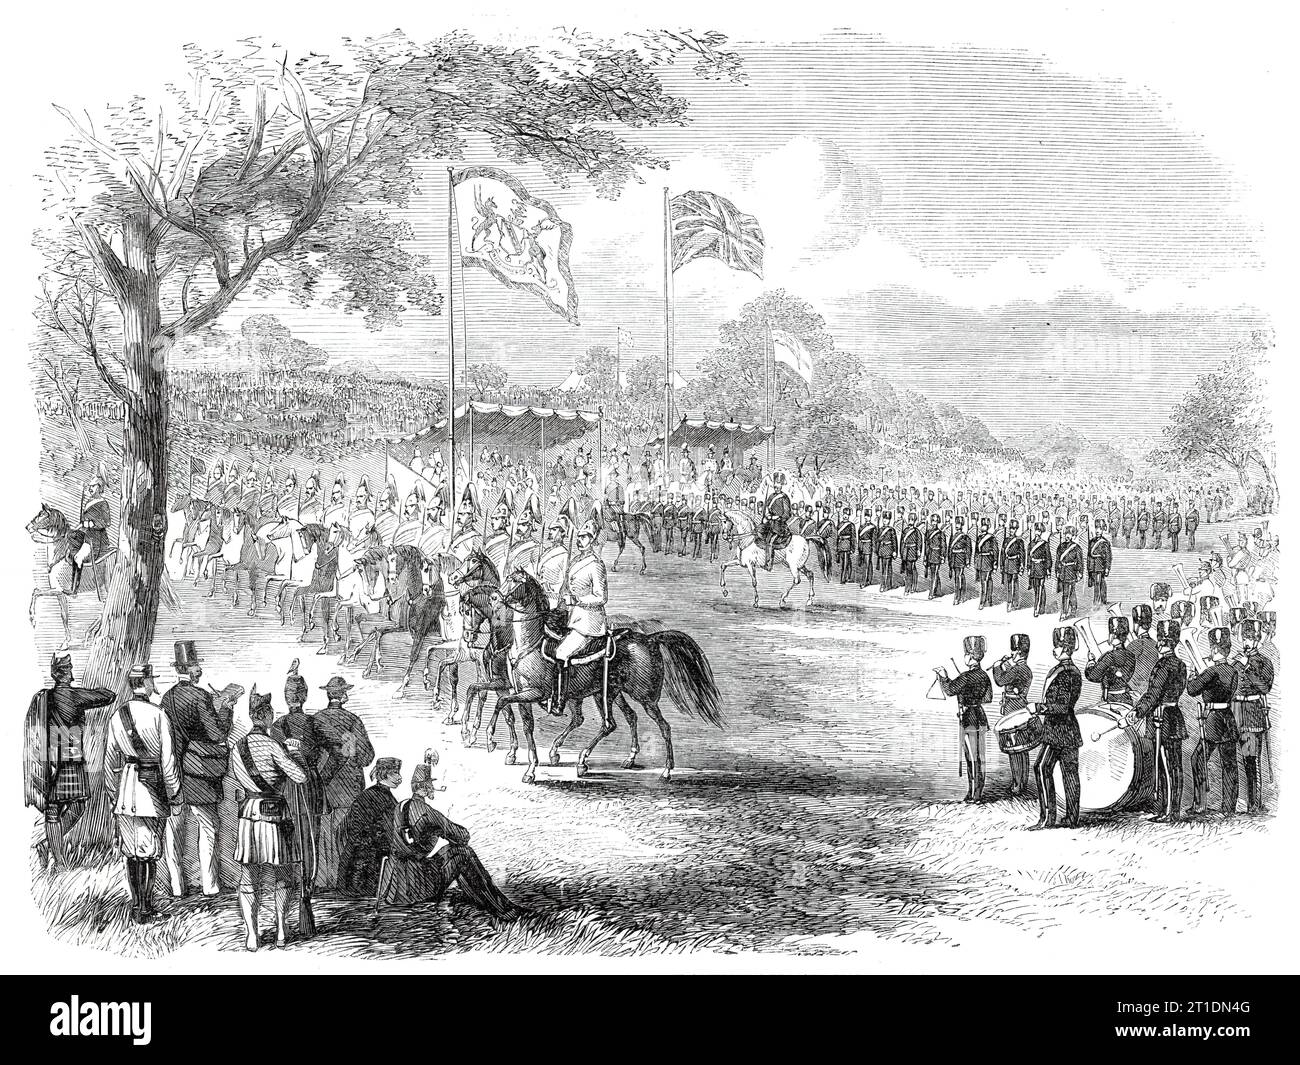 The 1st Lancashire Mounted Rifles and the Artillery Brigade marching past, 1860. Review of Lancashire Rifle Volunteers in Knowsley Park, '...commenced by the Lancashire Hussars, a magnificent body of cavalry, splendidly mounted, and numbering nearly 200 troopers. The public were loud in their encomiums on this splendid body of men and horses, whom it would be impossible to surpass by the finest regiment in the service. Next came the artillery, four battalions, and numbering upwards of 2000; and of which, if it were possible to make a distinction, the palm must be given to Colonel M'lver's thir Stock Photo